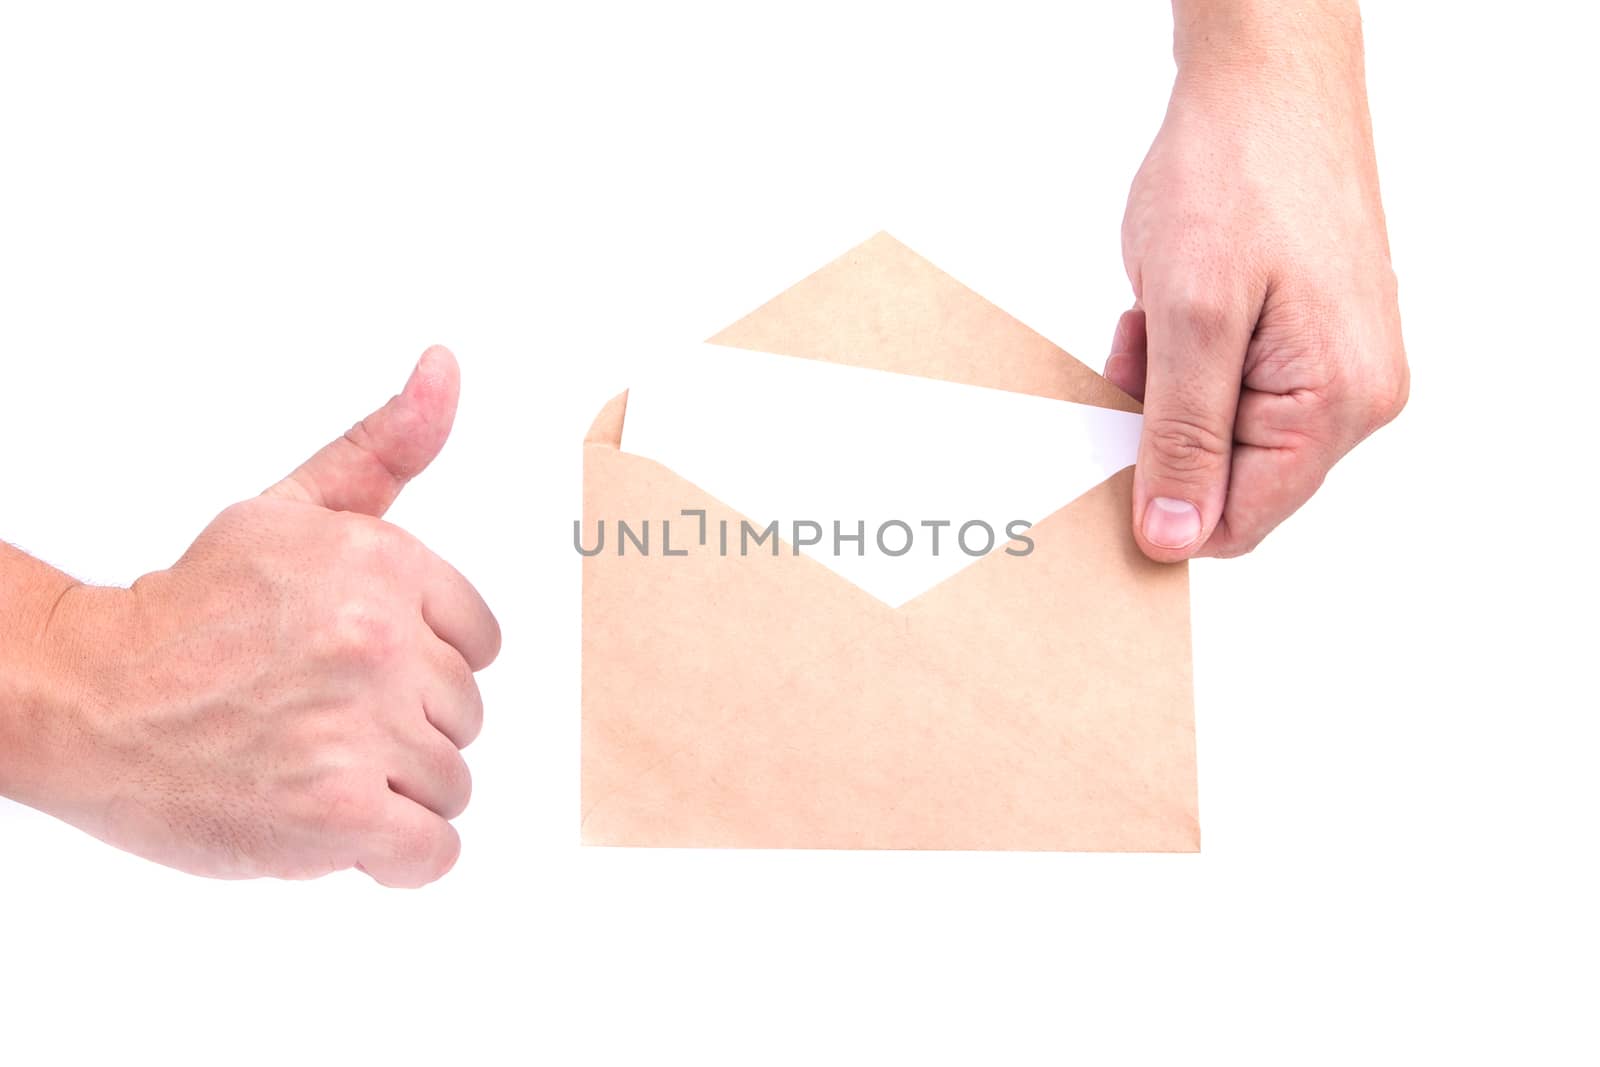 hands holding envelopes with letters on the white background isolated